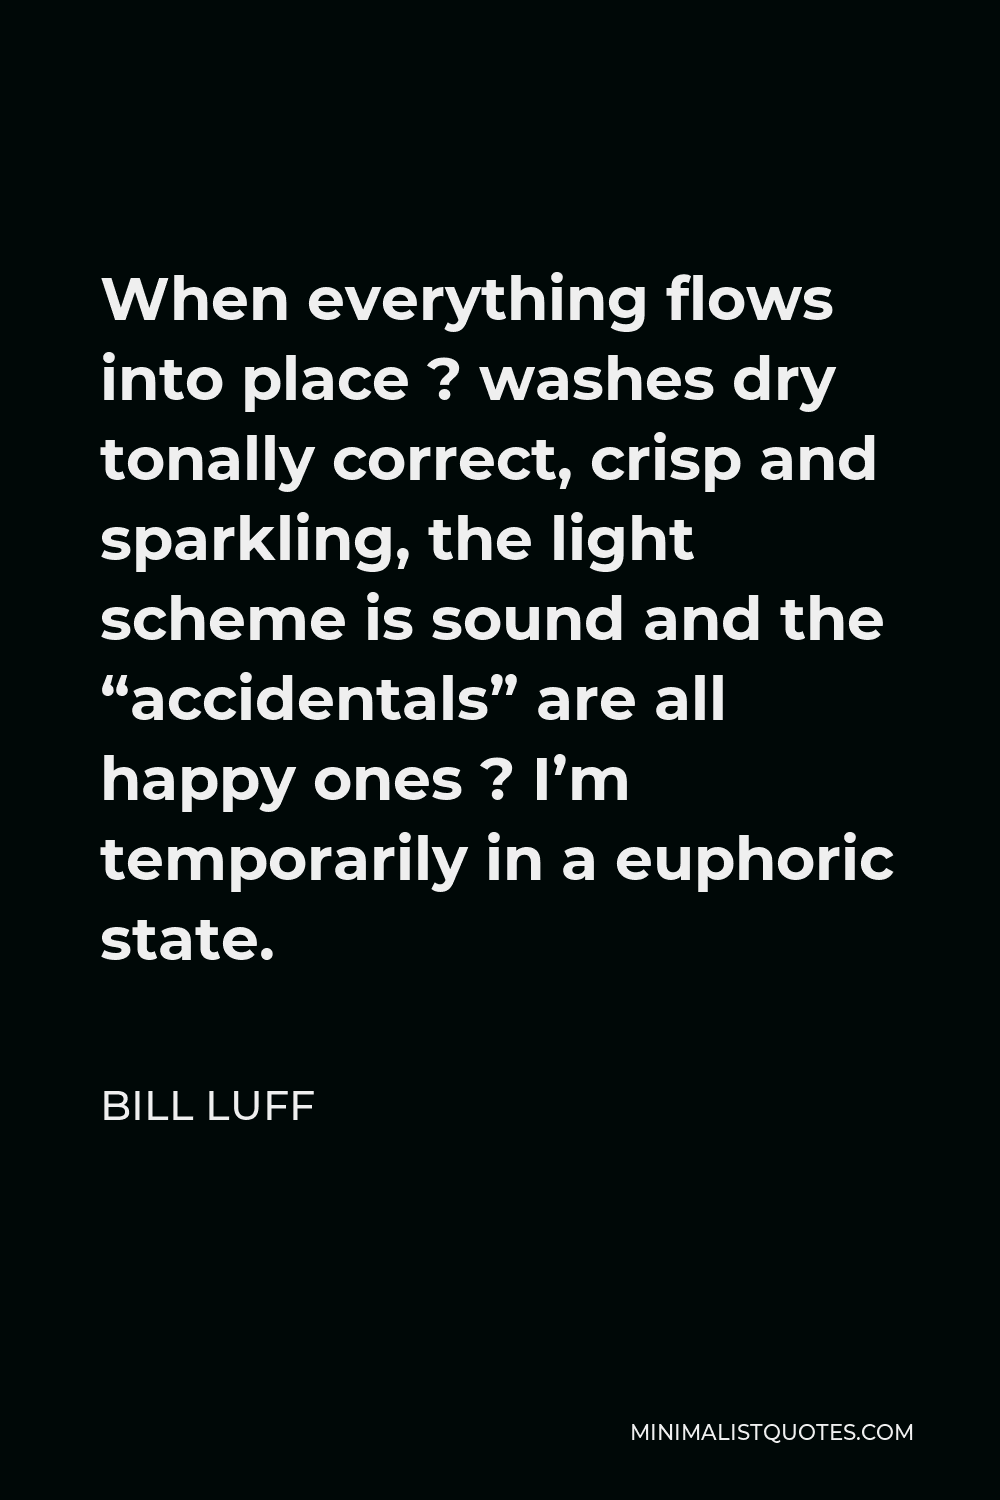 Bill Luff Quote - When everything flows into place ? washes dry tonally correct, crisp and sparkling, the light scheme is sound and the “accidentals” are all happy ones ? I’m temporarily in a euphoric state.